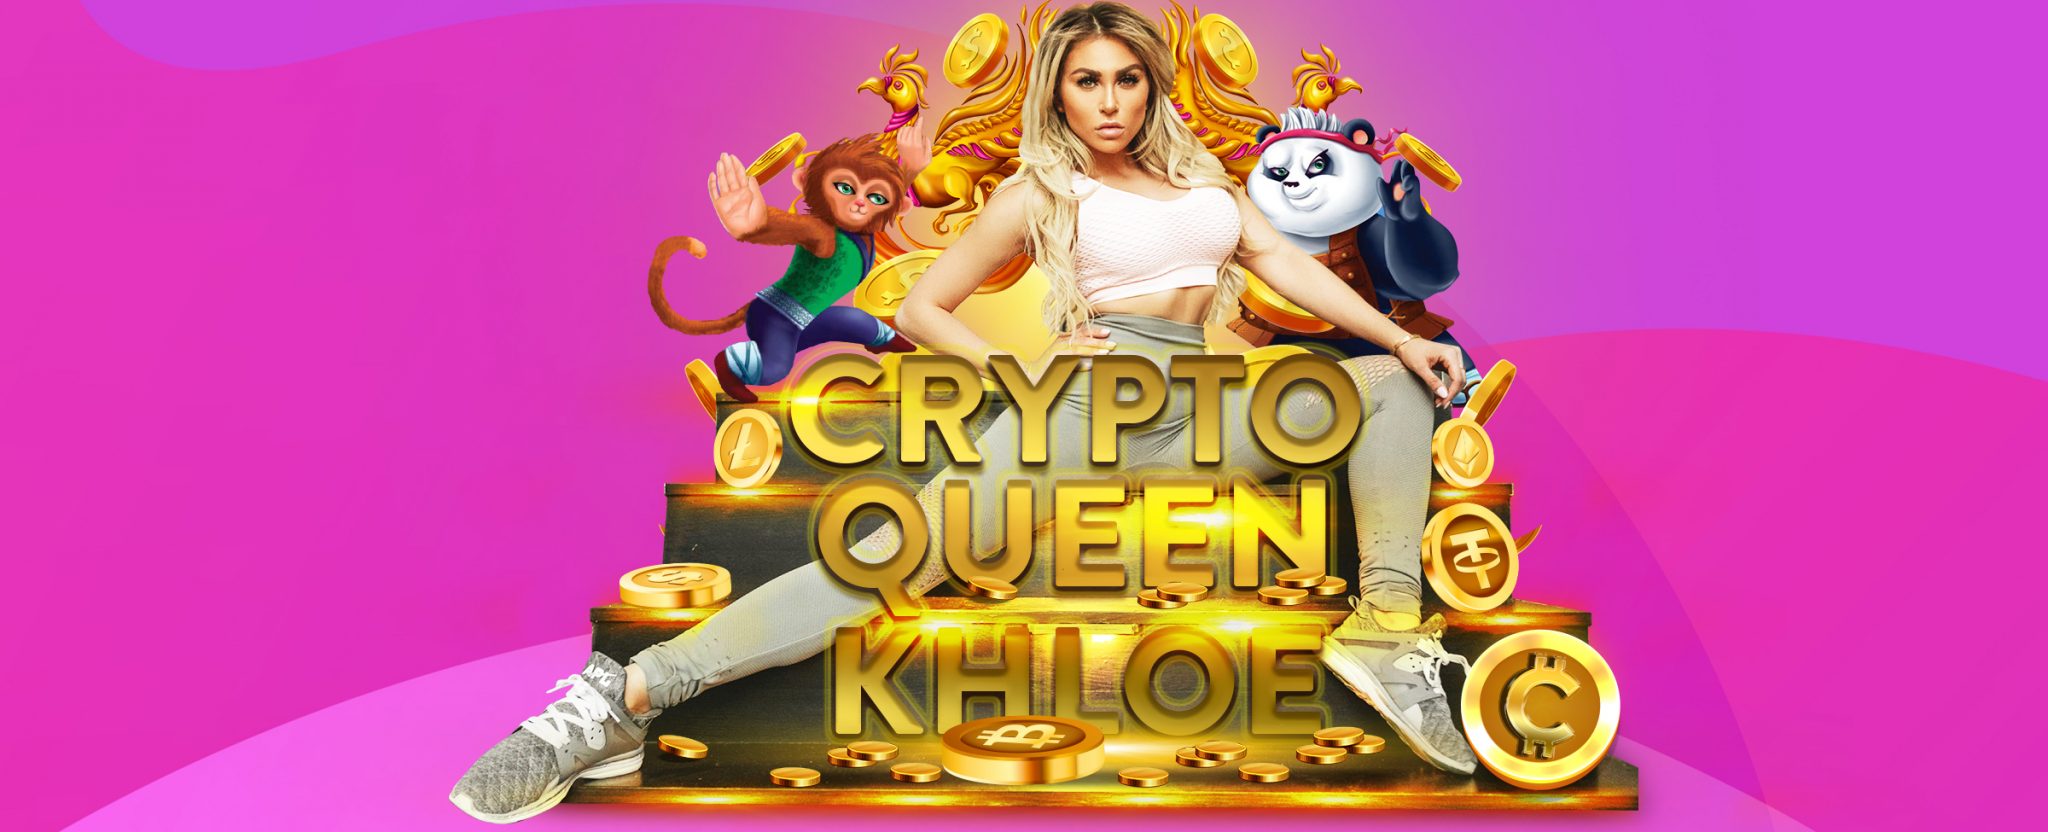 Crypto Queen Khloe Terae sits on a set of golden steps covered in crypto casino coins, as well as the panda and monkey characters from Fortune Keepers online slot at SlotsLV